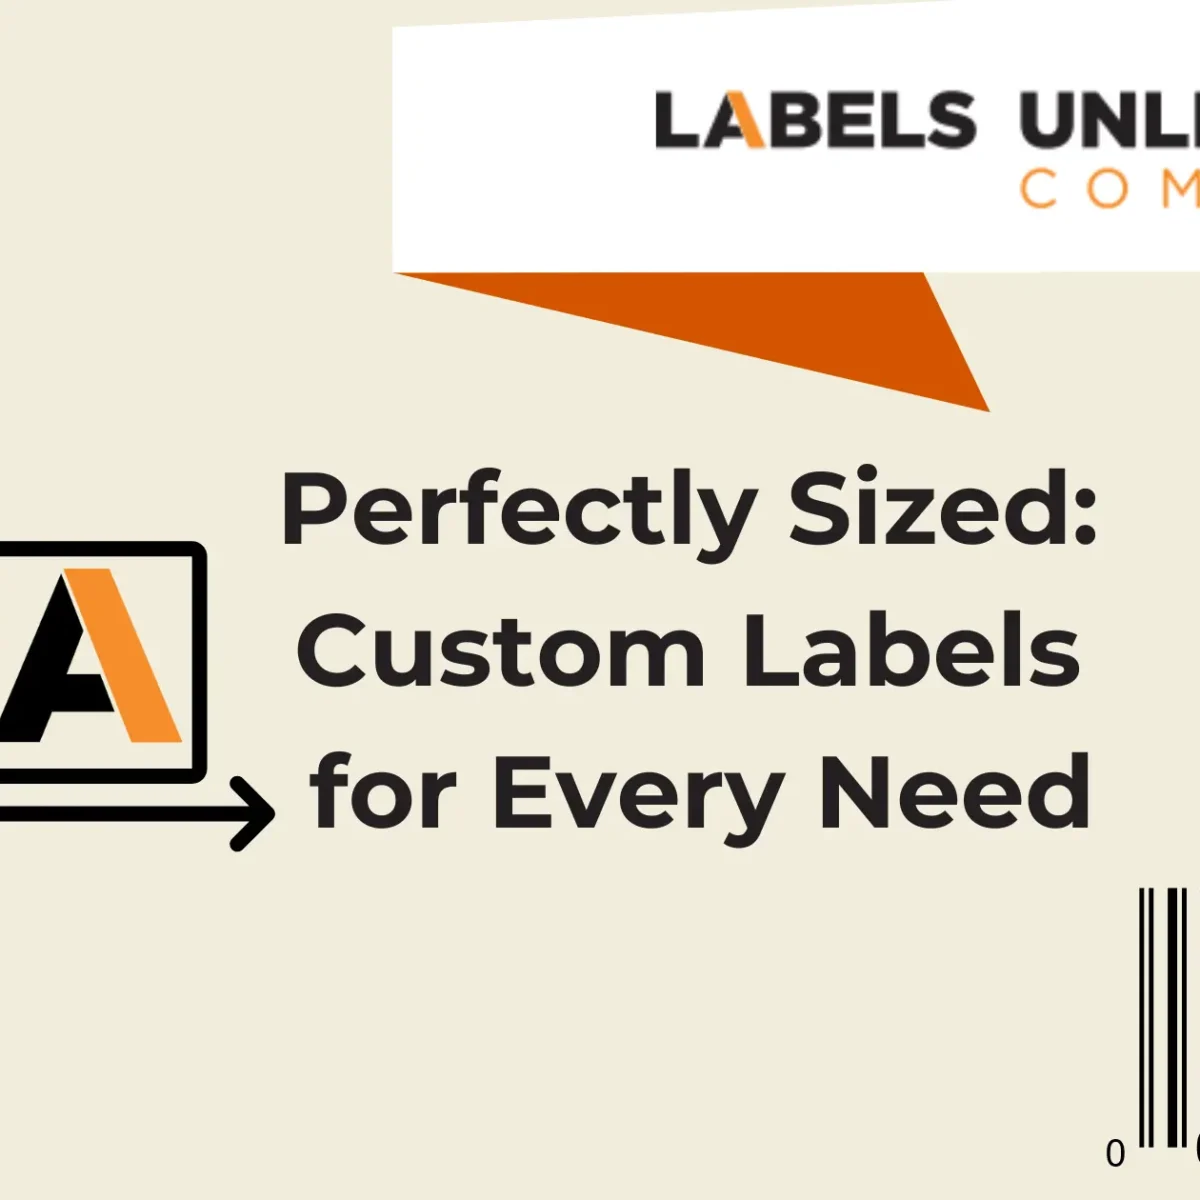 custom-sized labels for every need